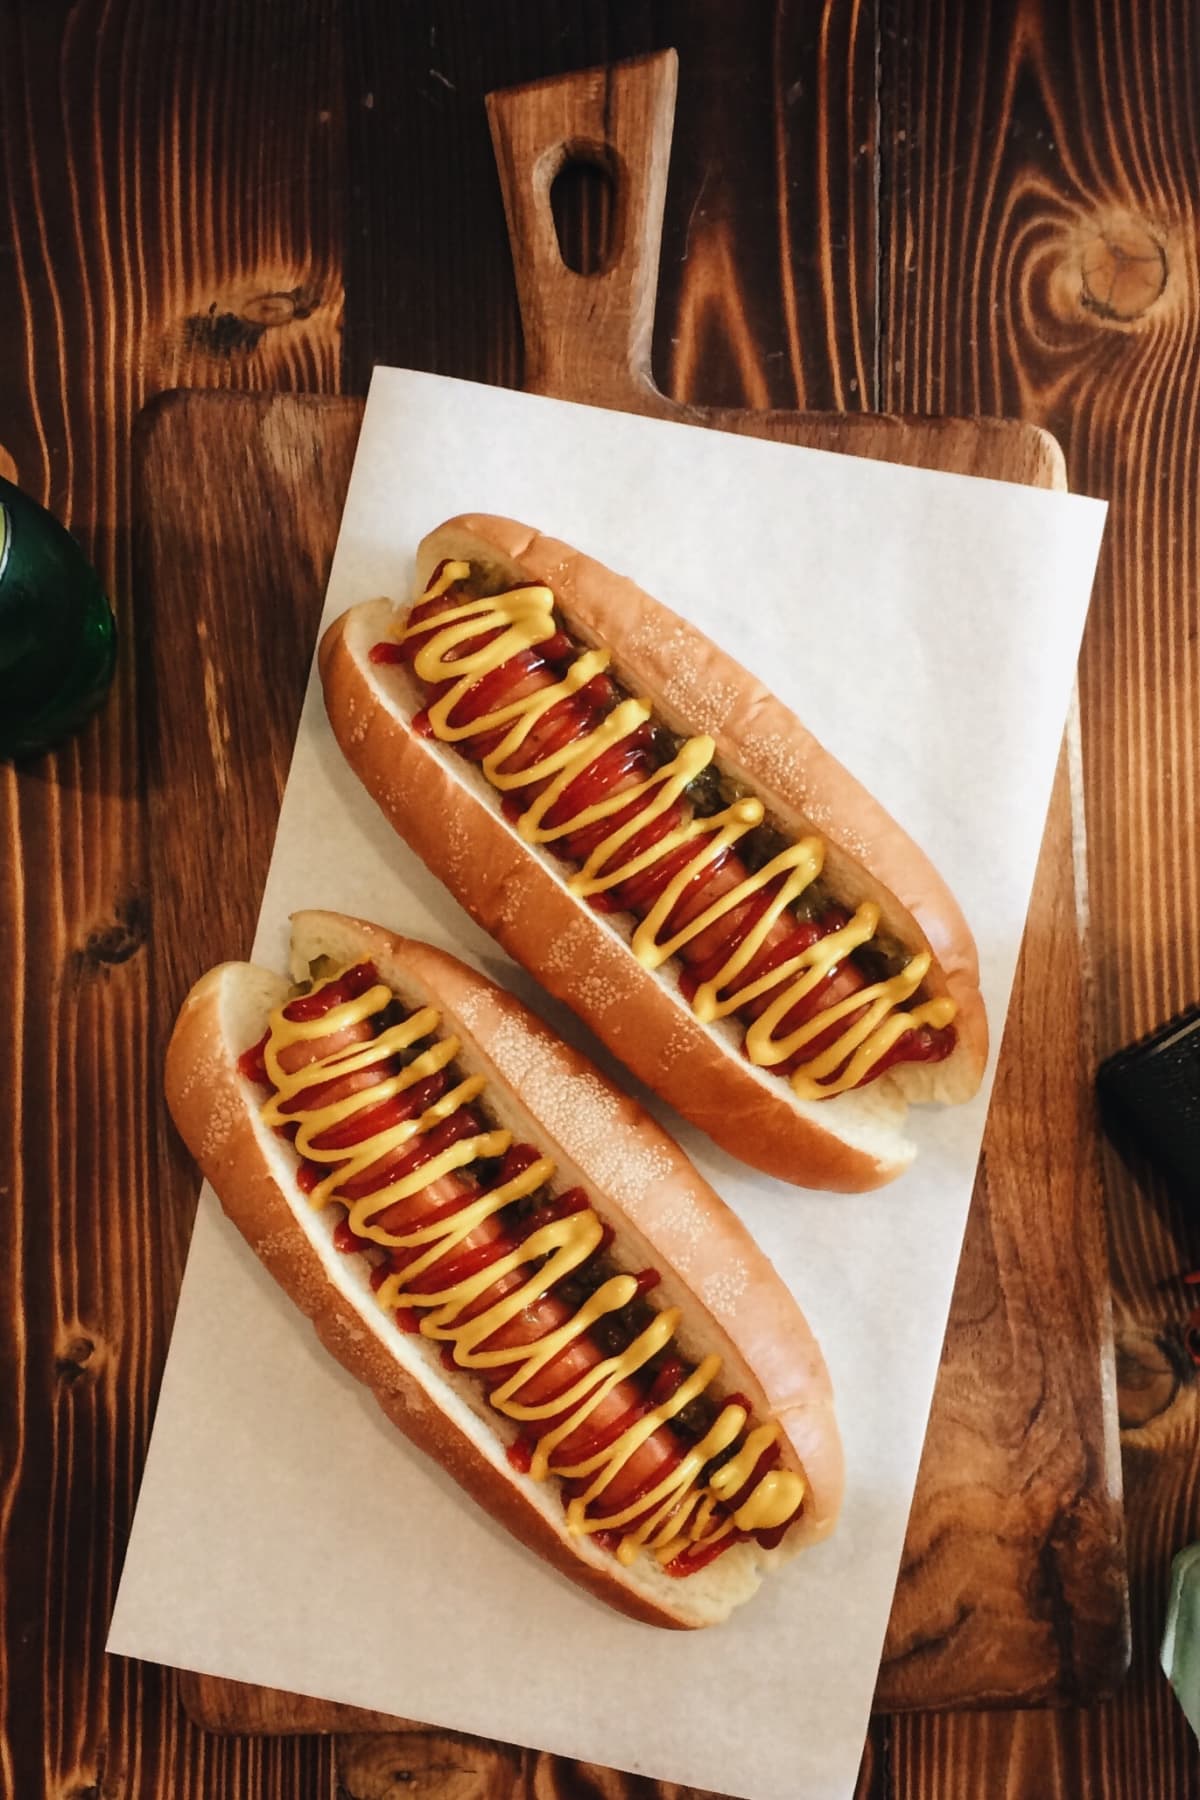 Variety of hot dogs with ketchup and mustard on parchment paper